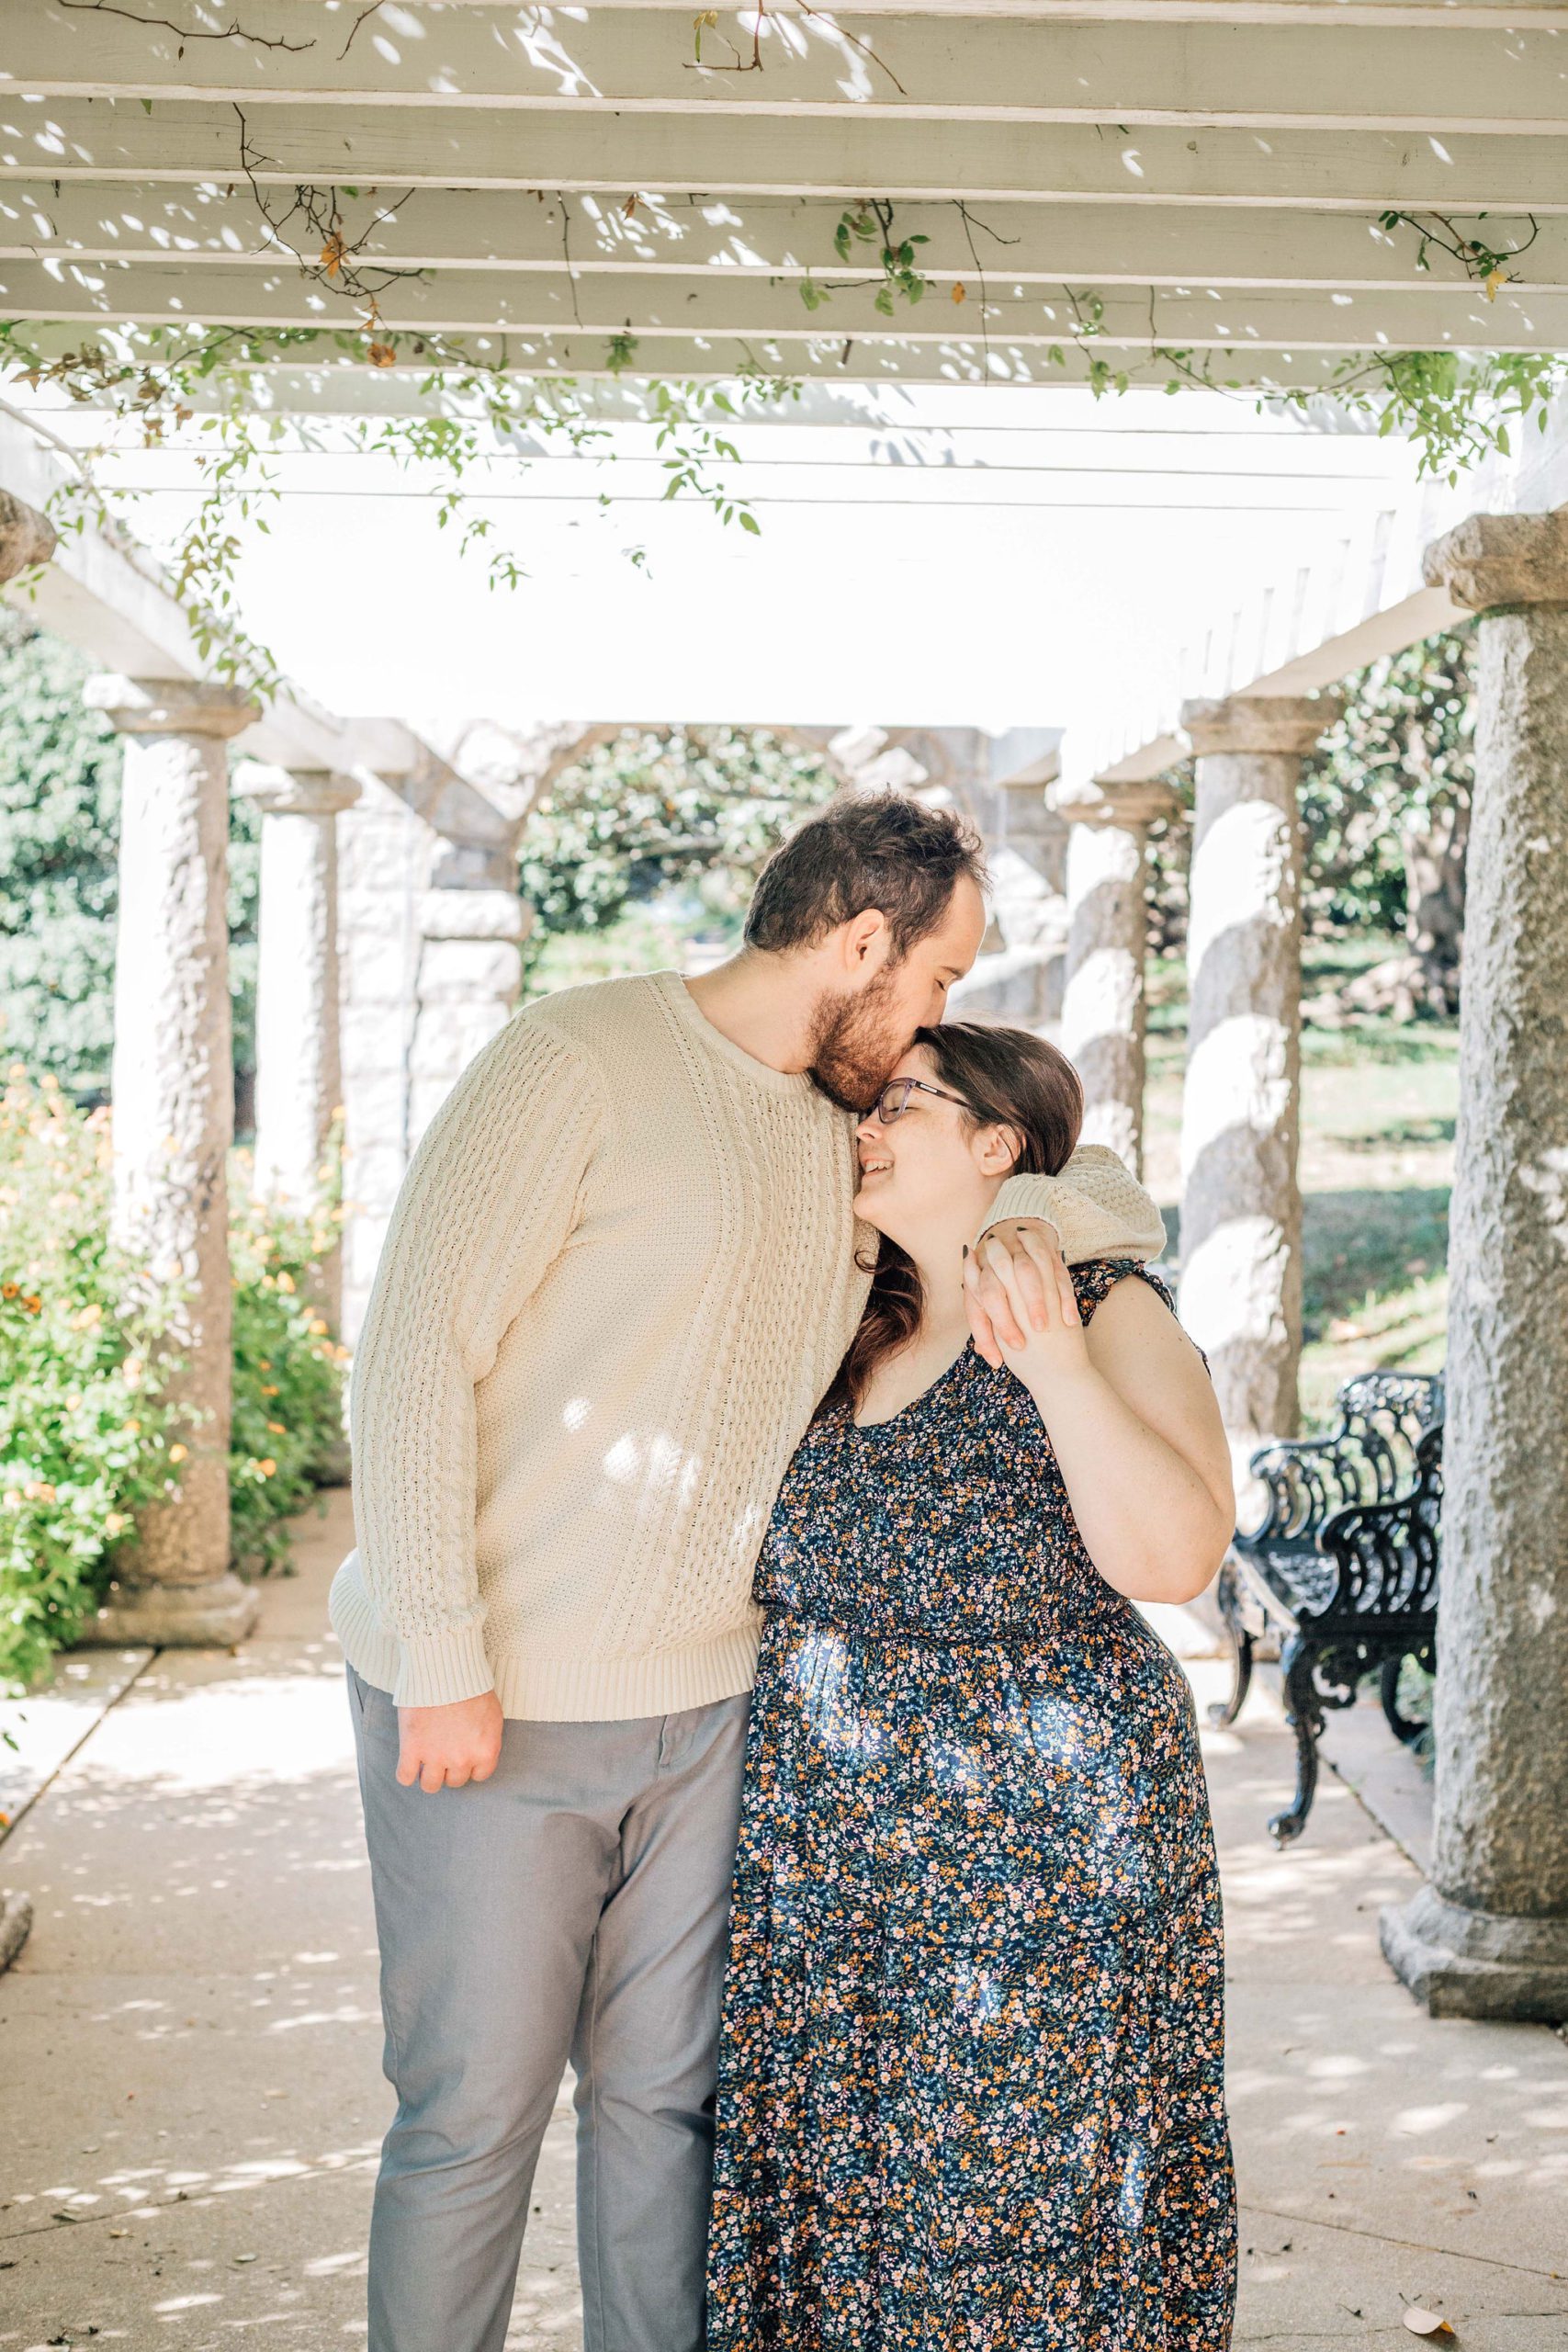 man leaning into his fiance as he kisses her foreheads and she smiles while for natural engagement photo idea